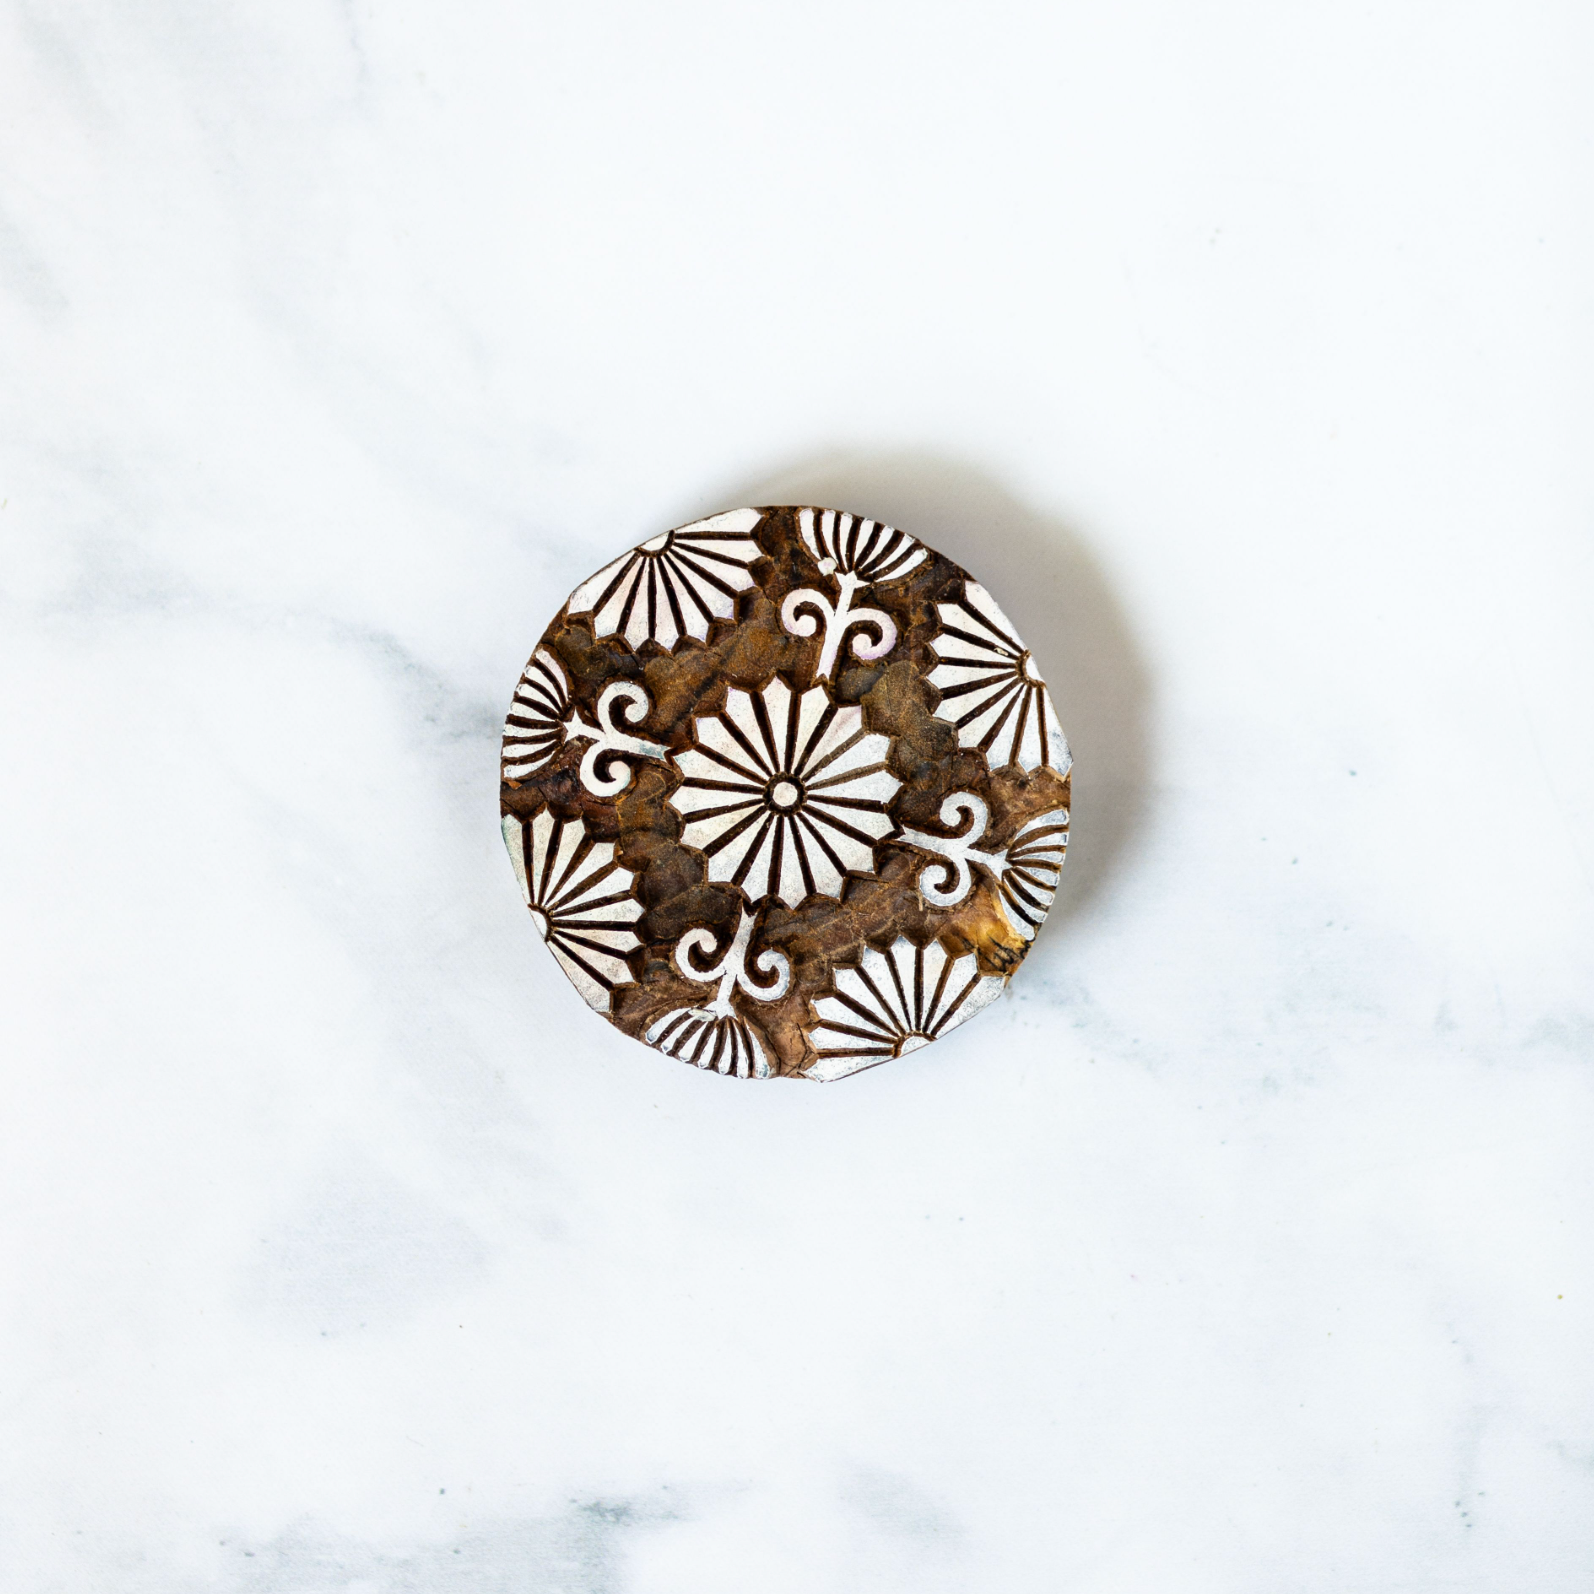 Hand-Carved Wooden Block Coaster - Floral, Daisy by Mended